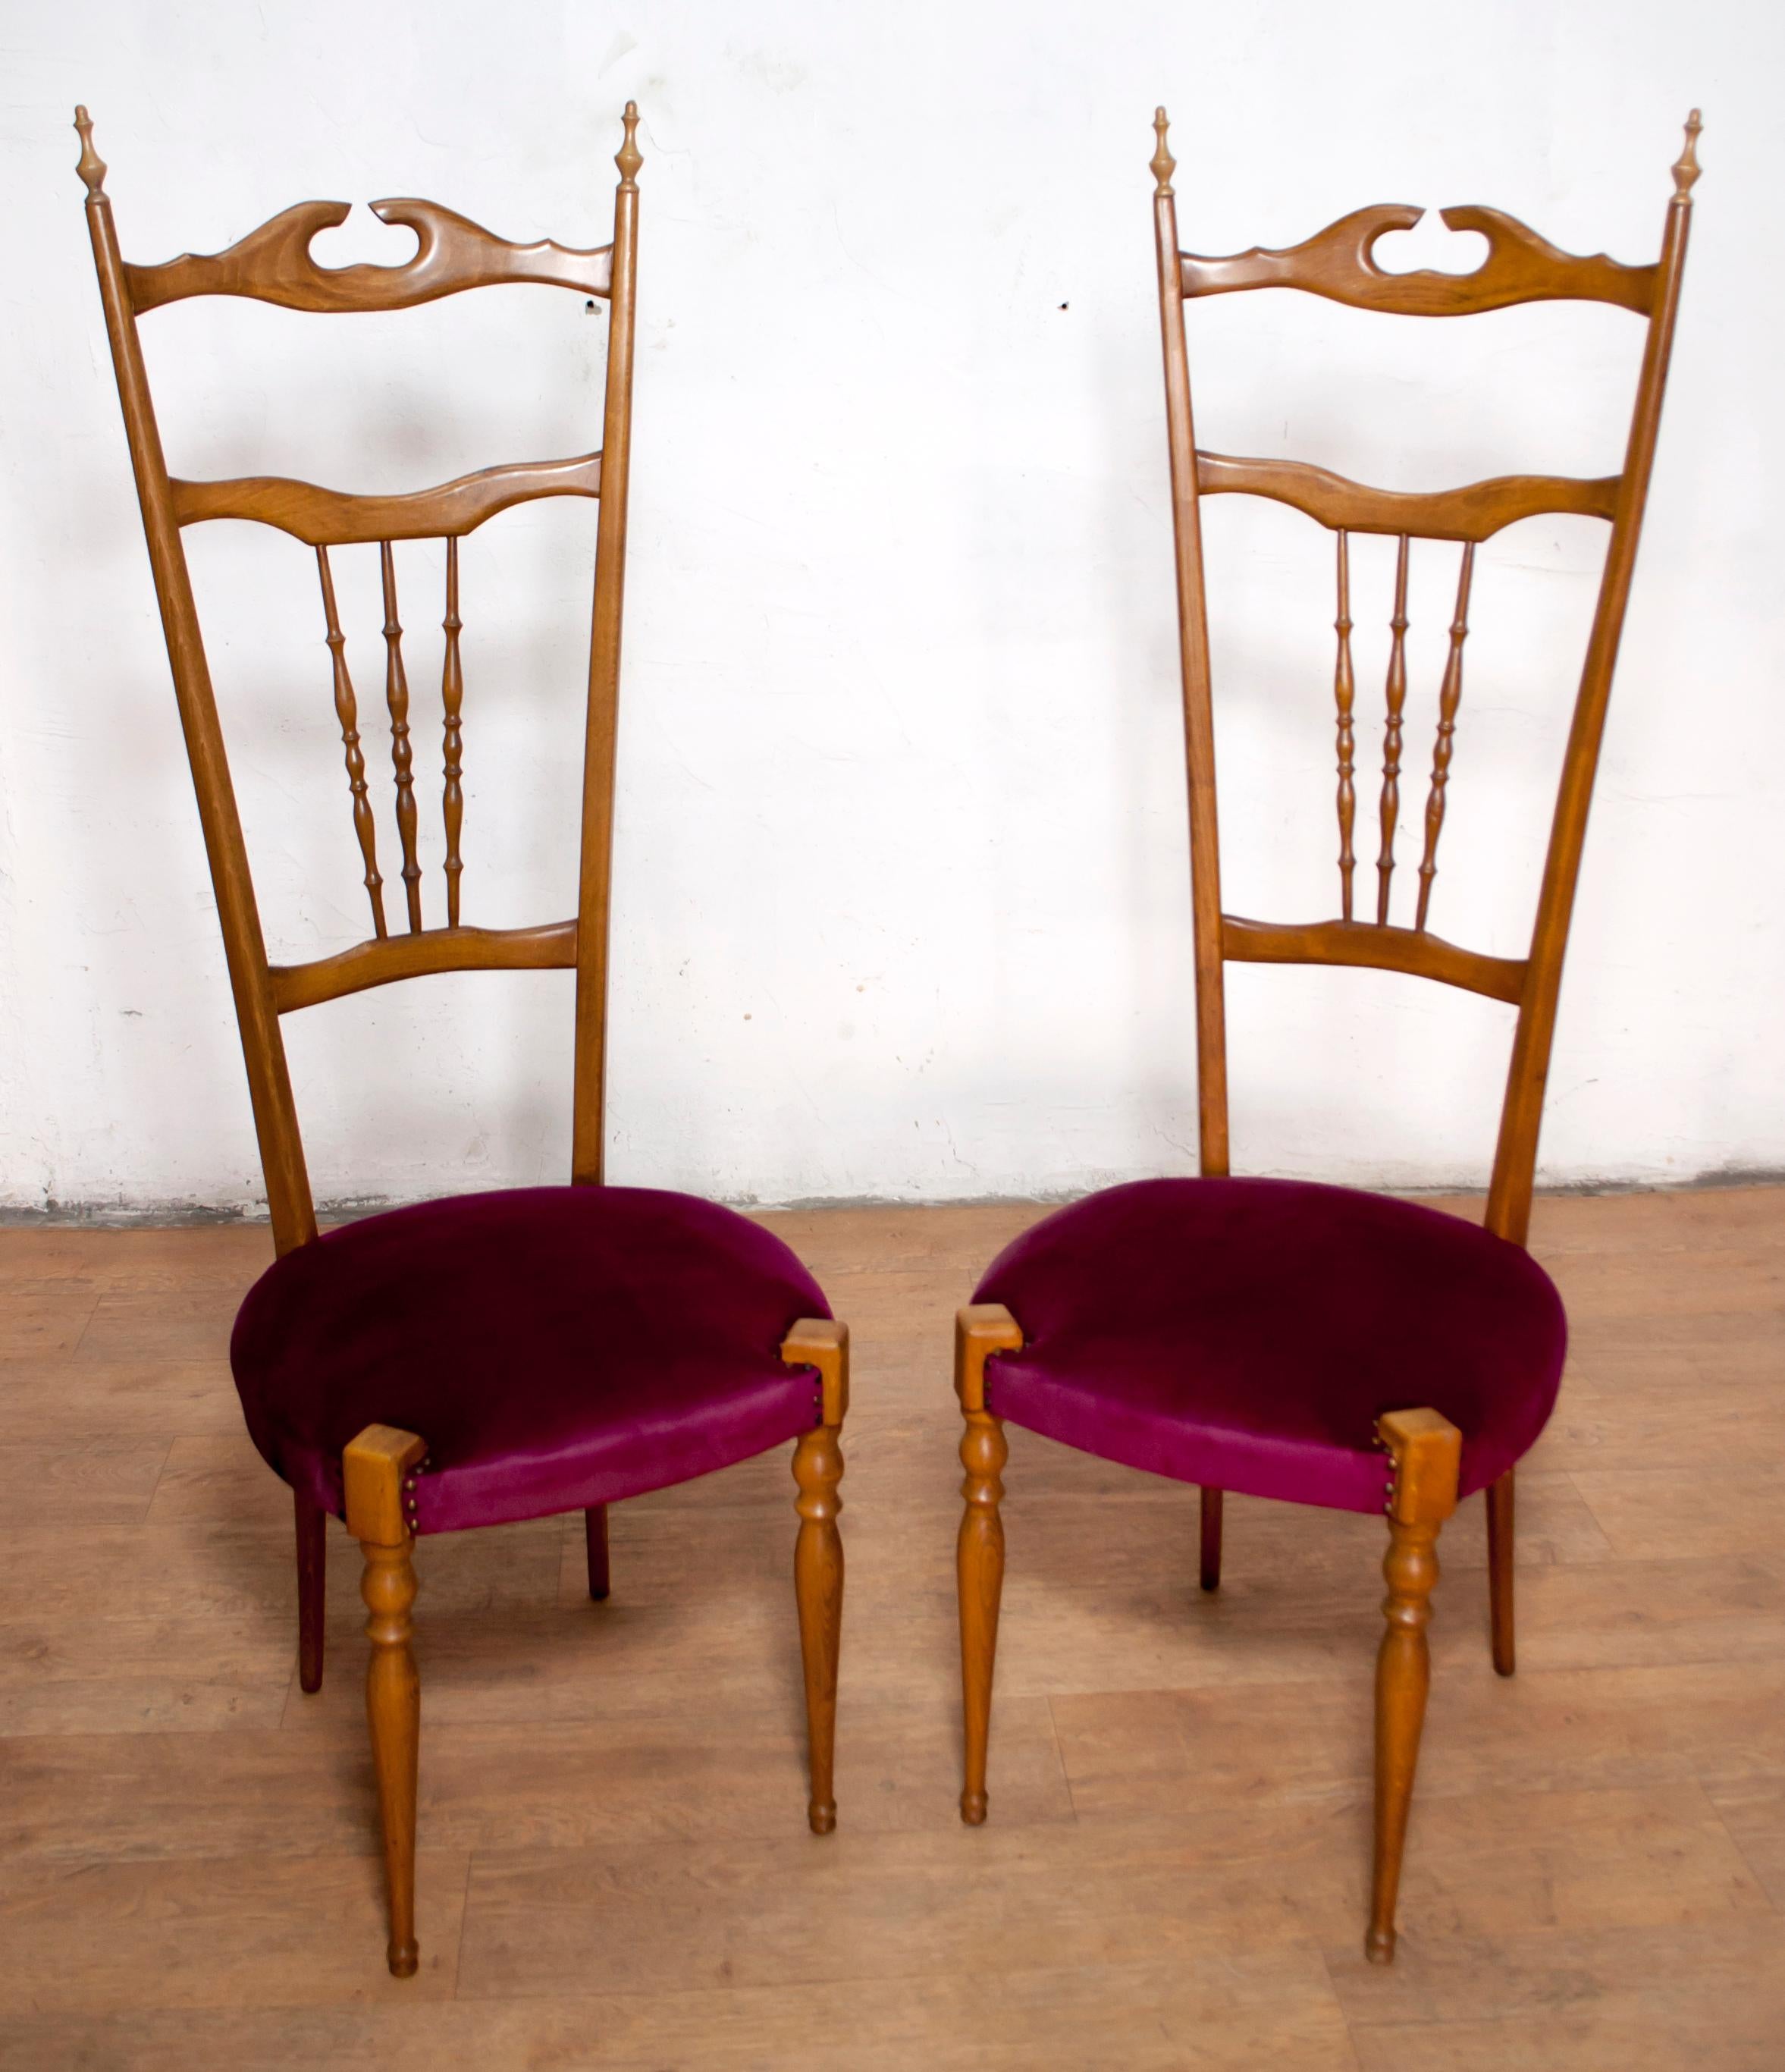 This pair of Chiavari chairs with a typical high back have been designed by Gaetano Descalzi in the city of Chiavari in Italy, where they have been produced since then, in various models.

Chiavari was created in 1807 by the Chiavari cabinet maker